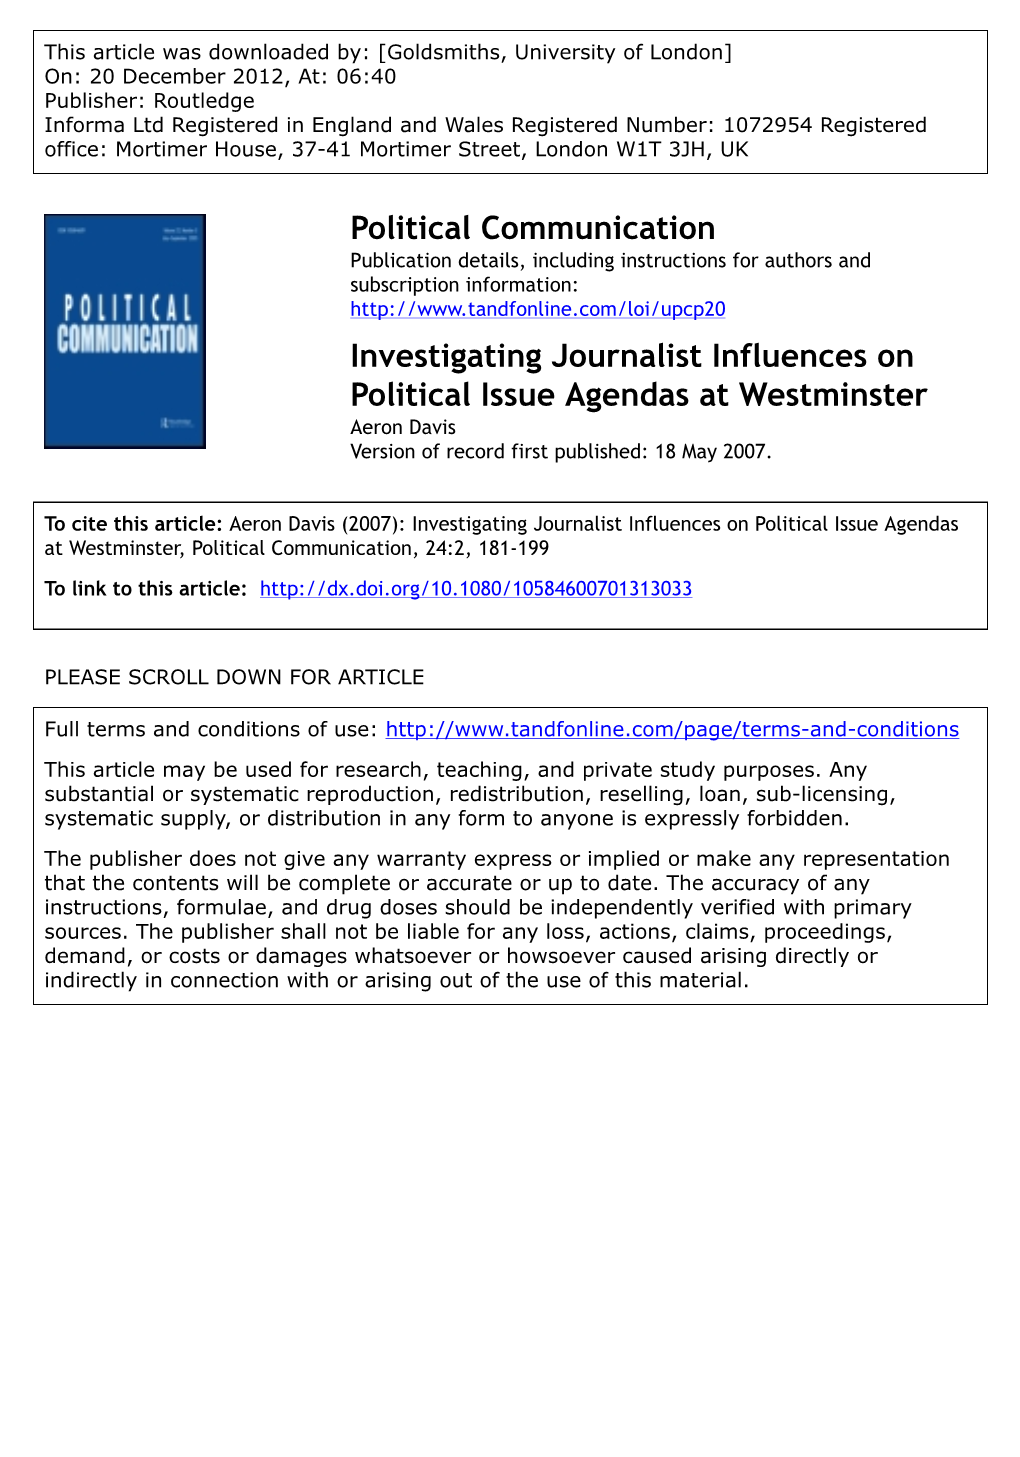 Investigating Journalist Influences on Political Issue Agendas at Westminster Aeron Davis Version of Record First Published: 18 May 2007